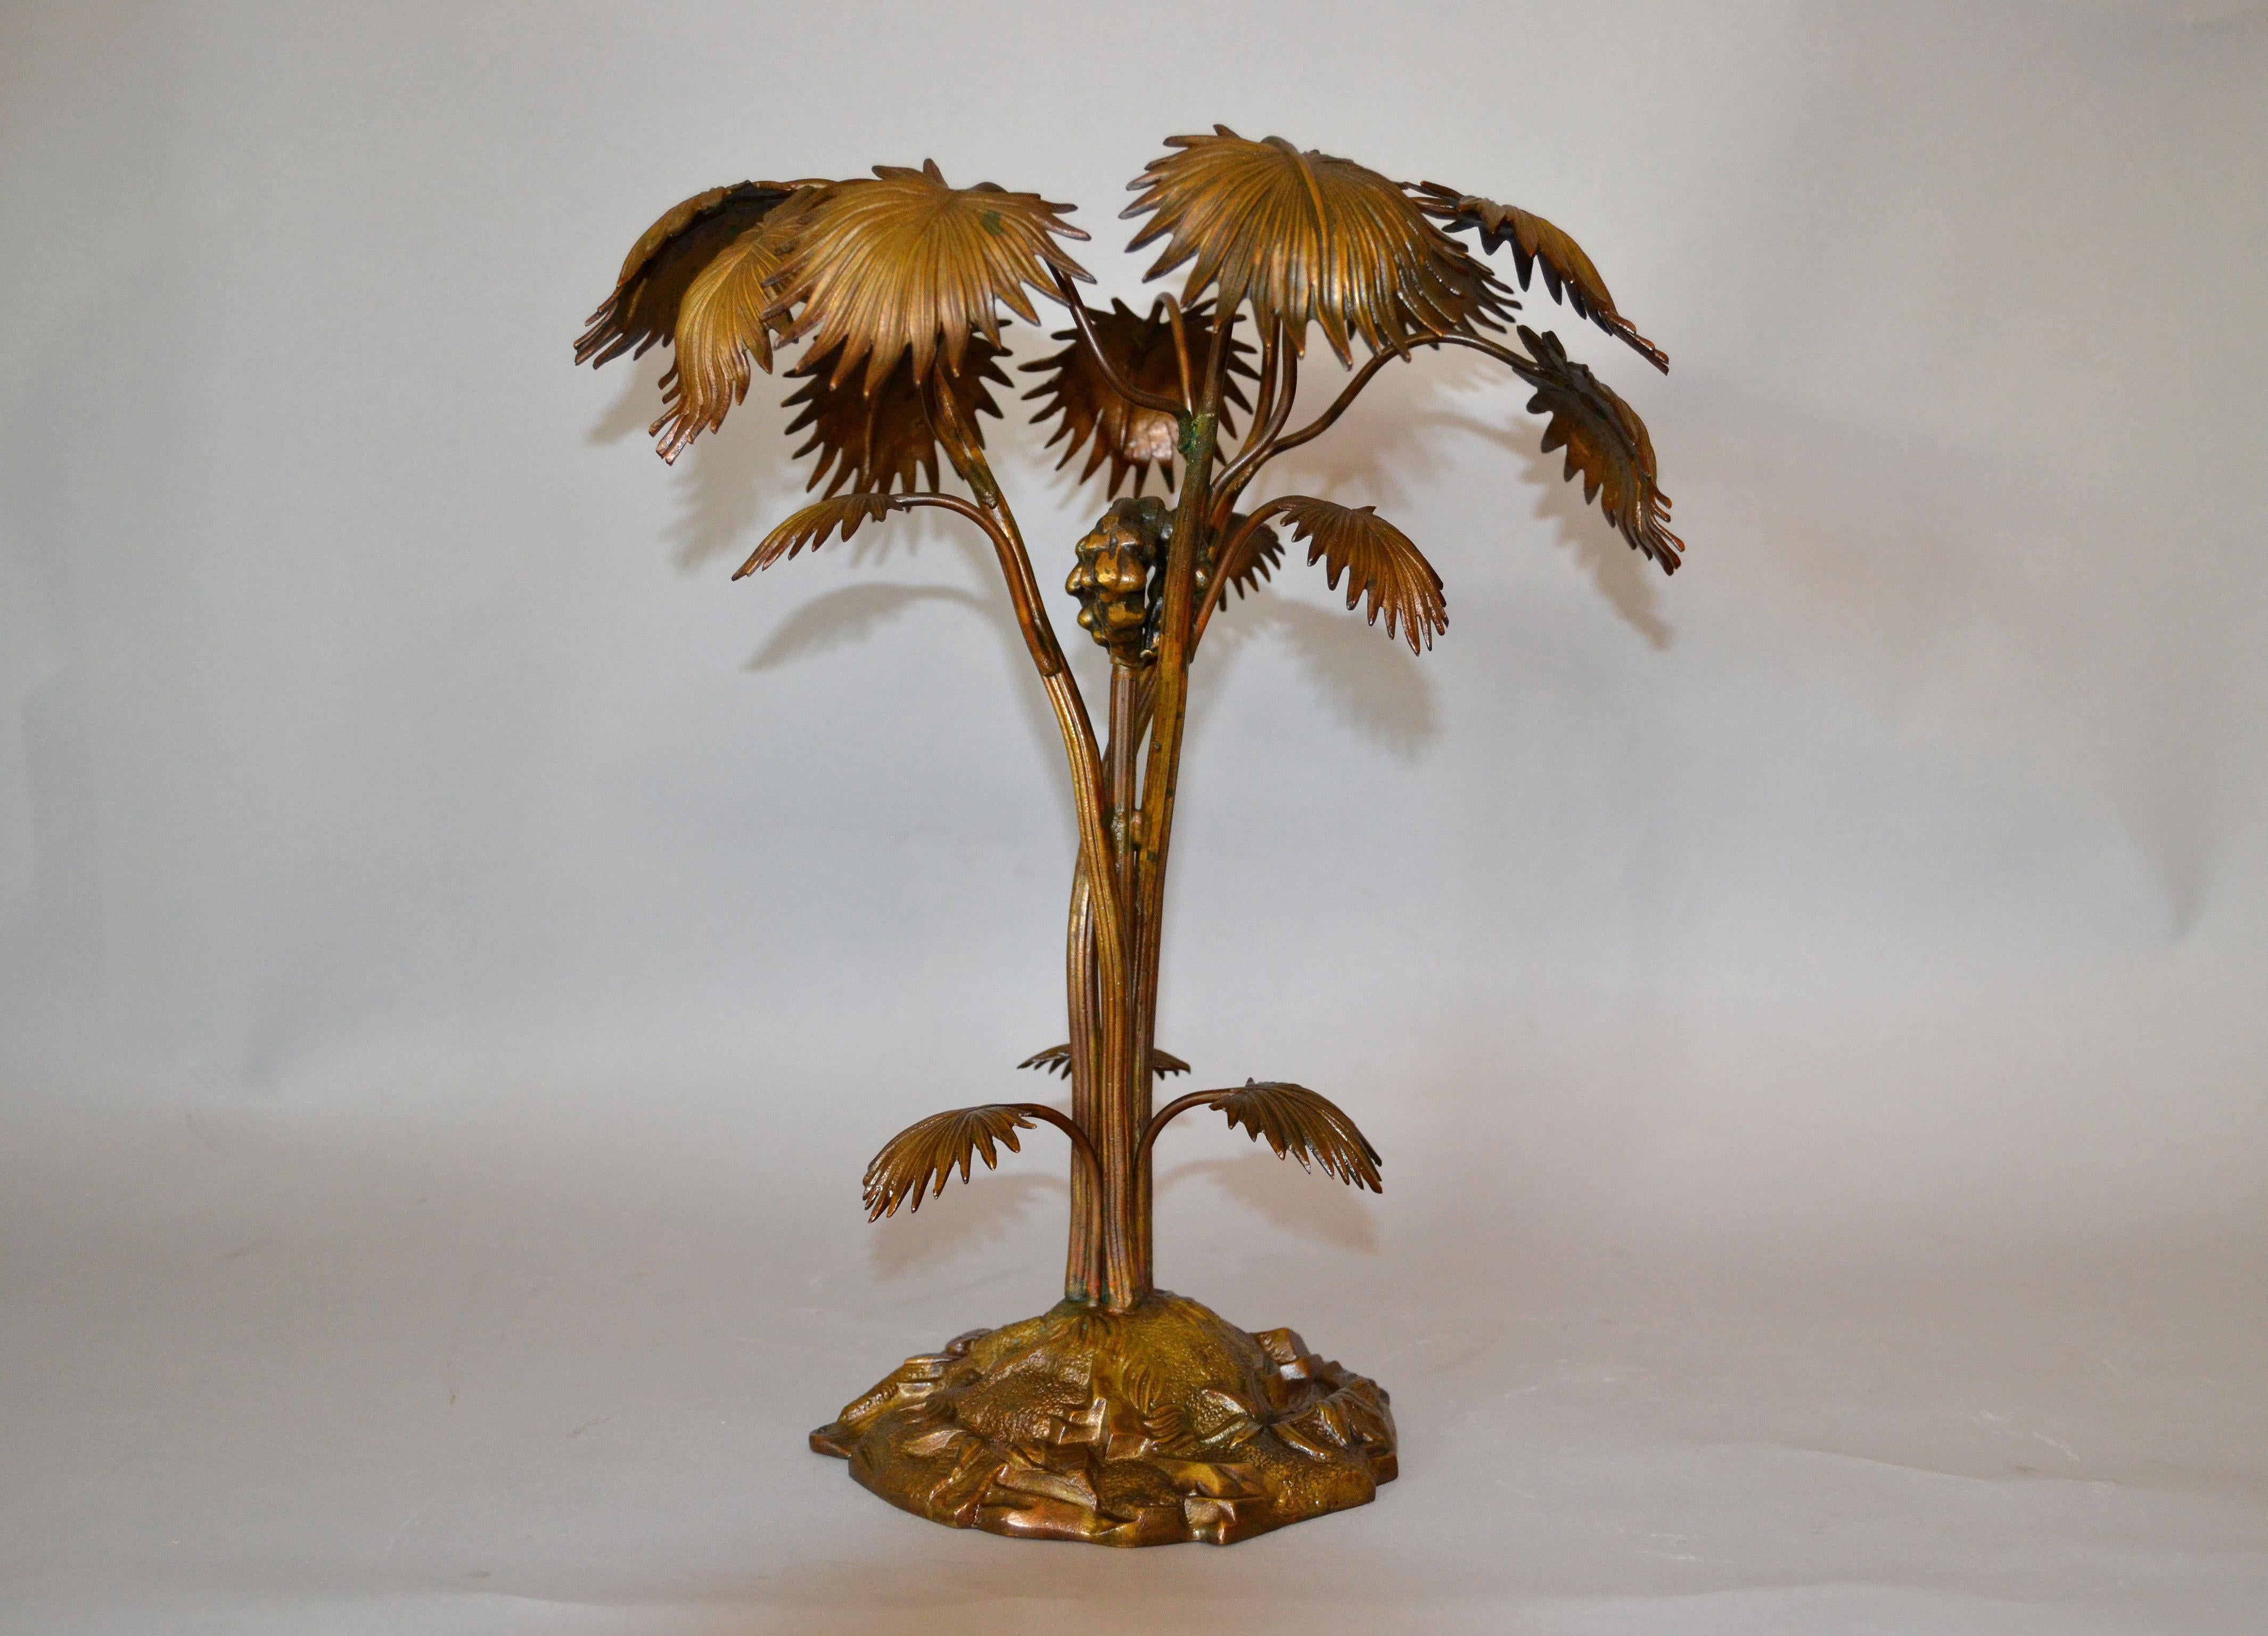 This is a tree sculpture from the 1940s in bronze with amazing details.
Please note this superb craftsmanship.